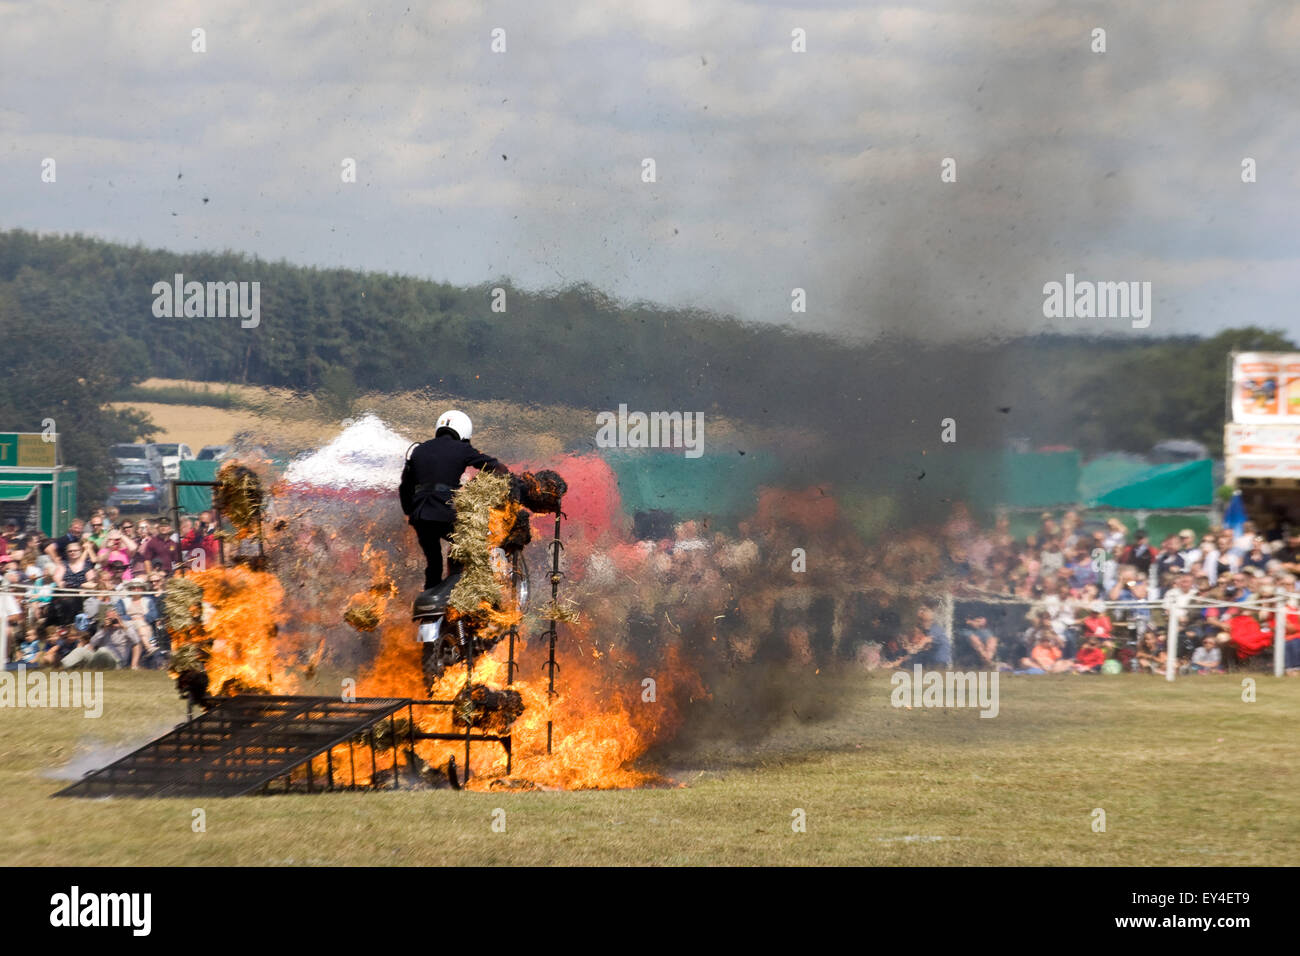 Royal corps of signals white helmet motorcycle display team 750 cc Triumph TR7V Tiger Motorcycles Jumping through Fire Stock Photo